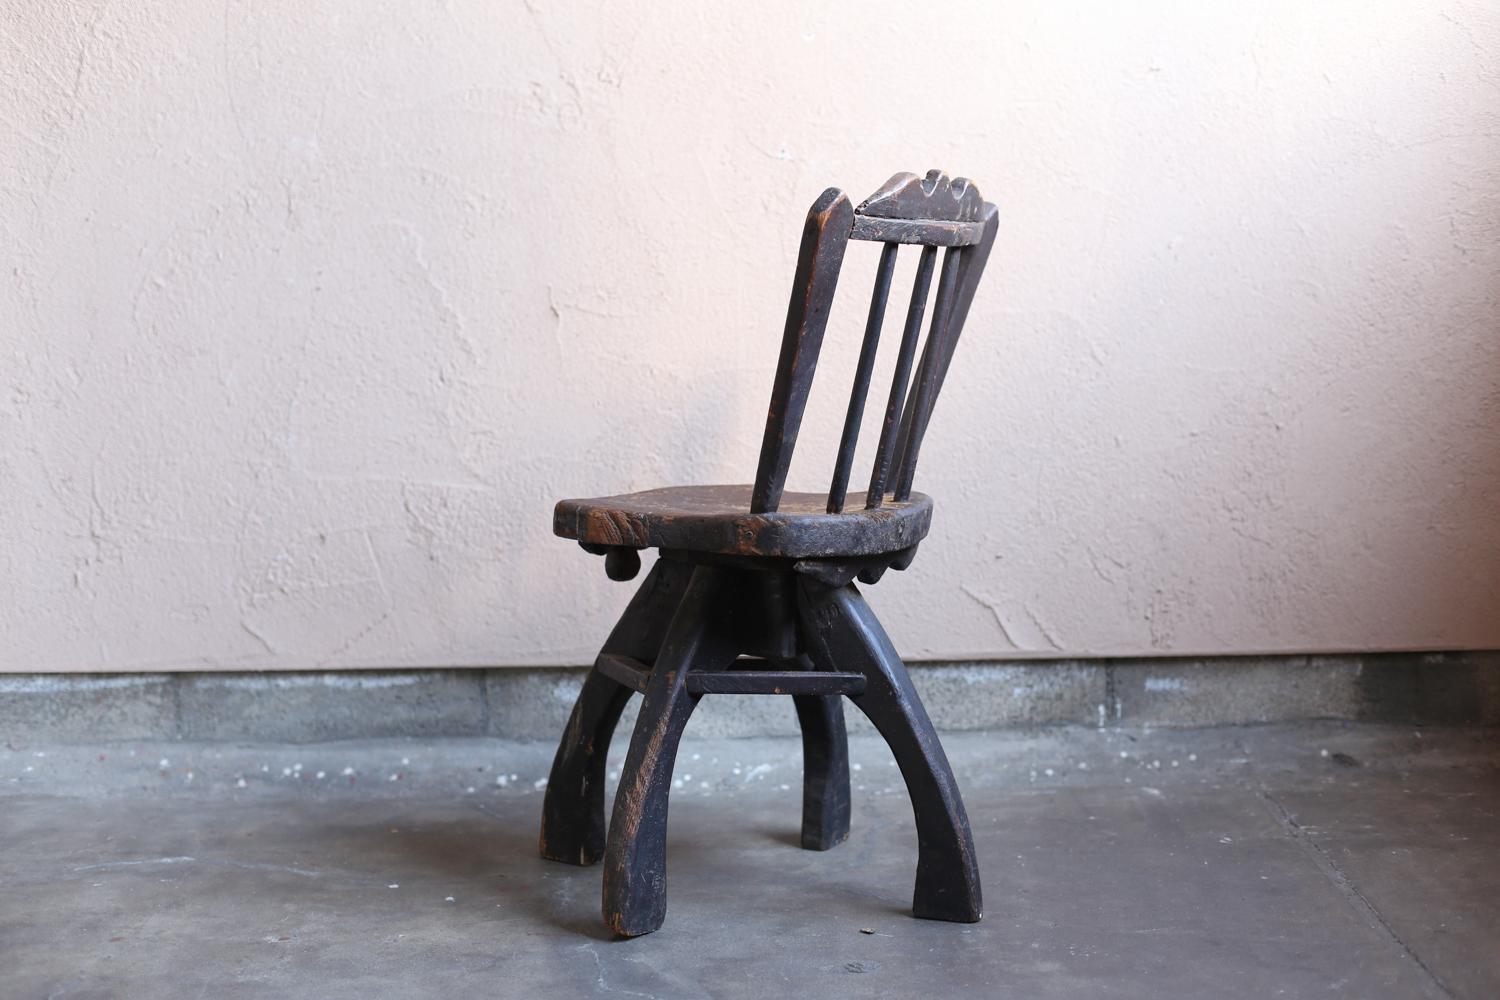 Hand-Crafted Primitive Wood Chair from Japan 1860s-1900s / Wabi Sabi Wooden Chair Mingei For Sale